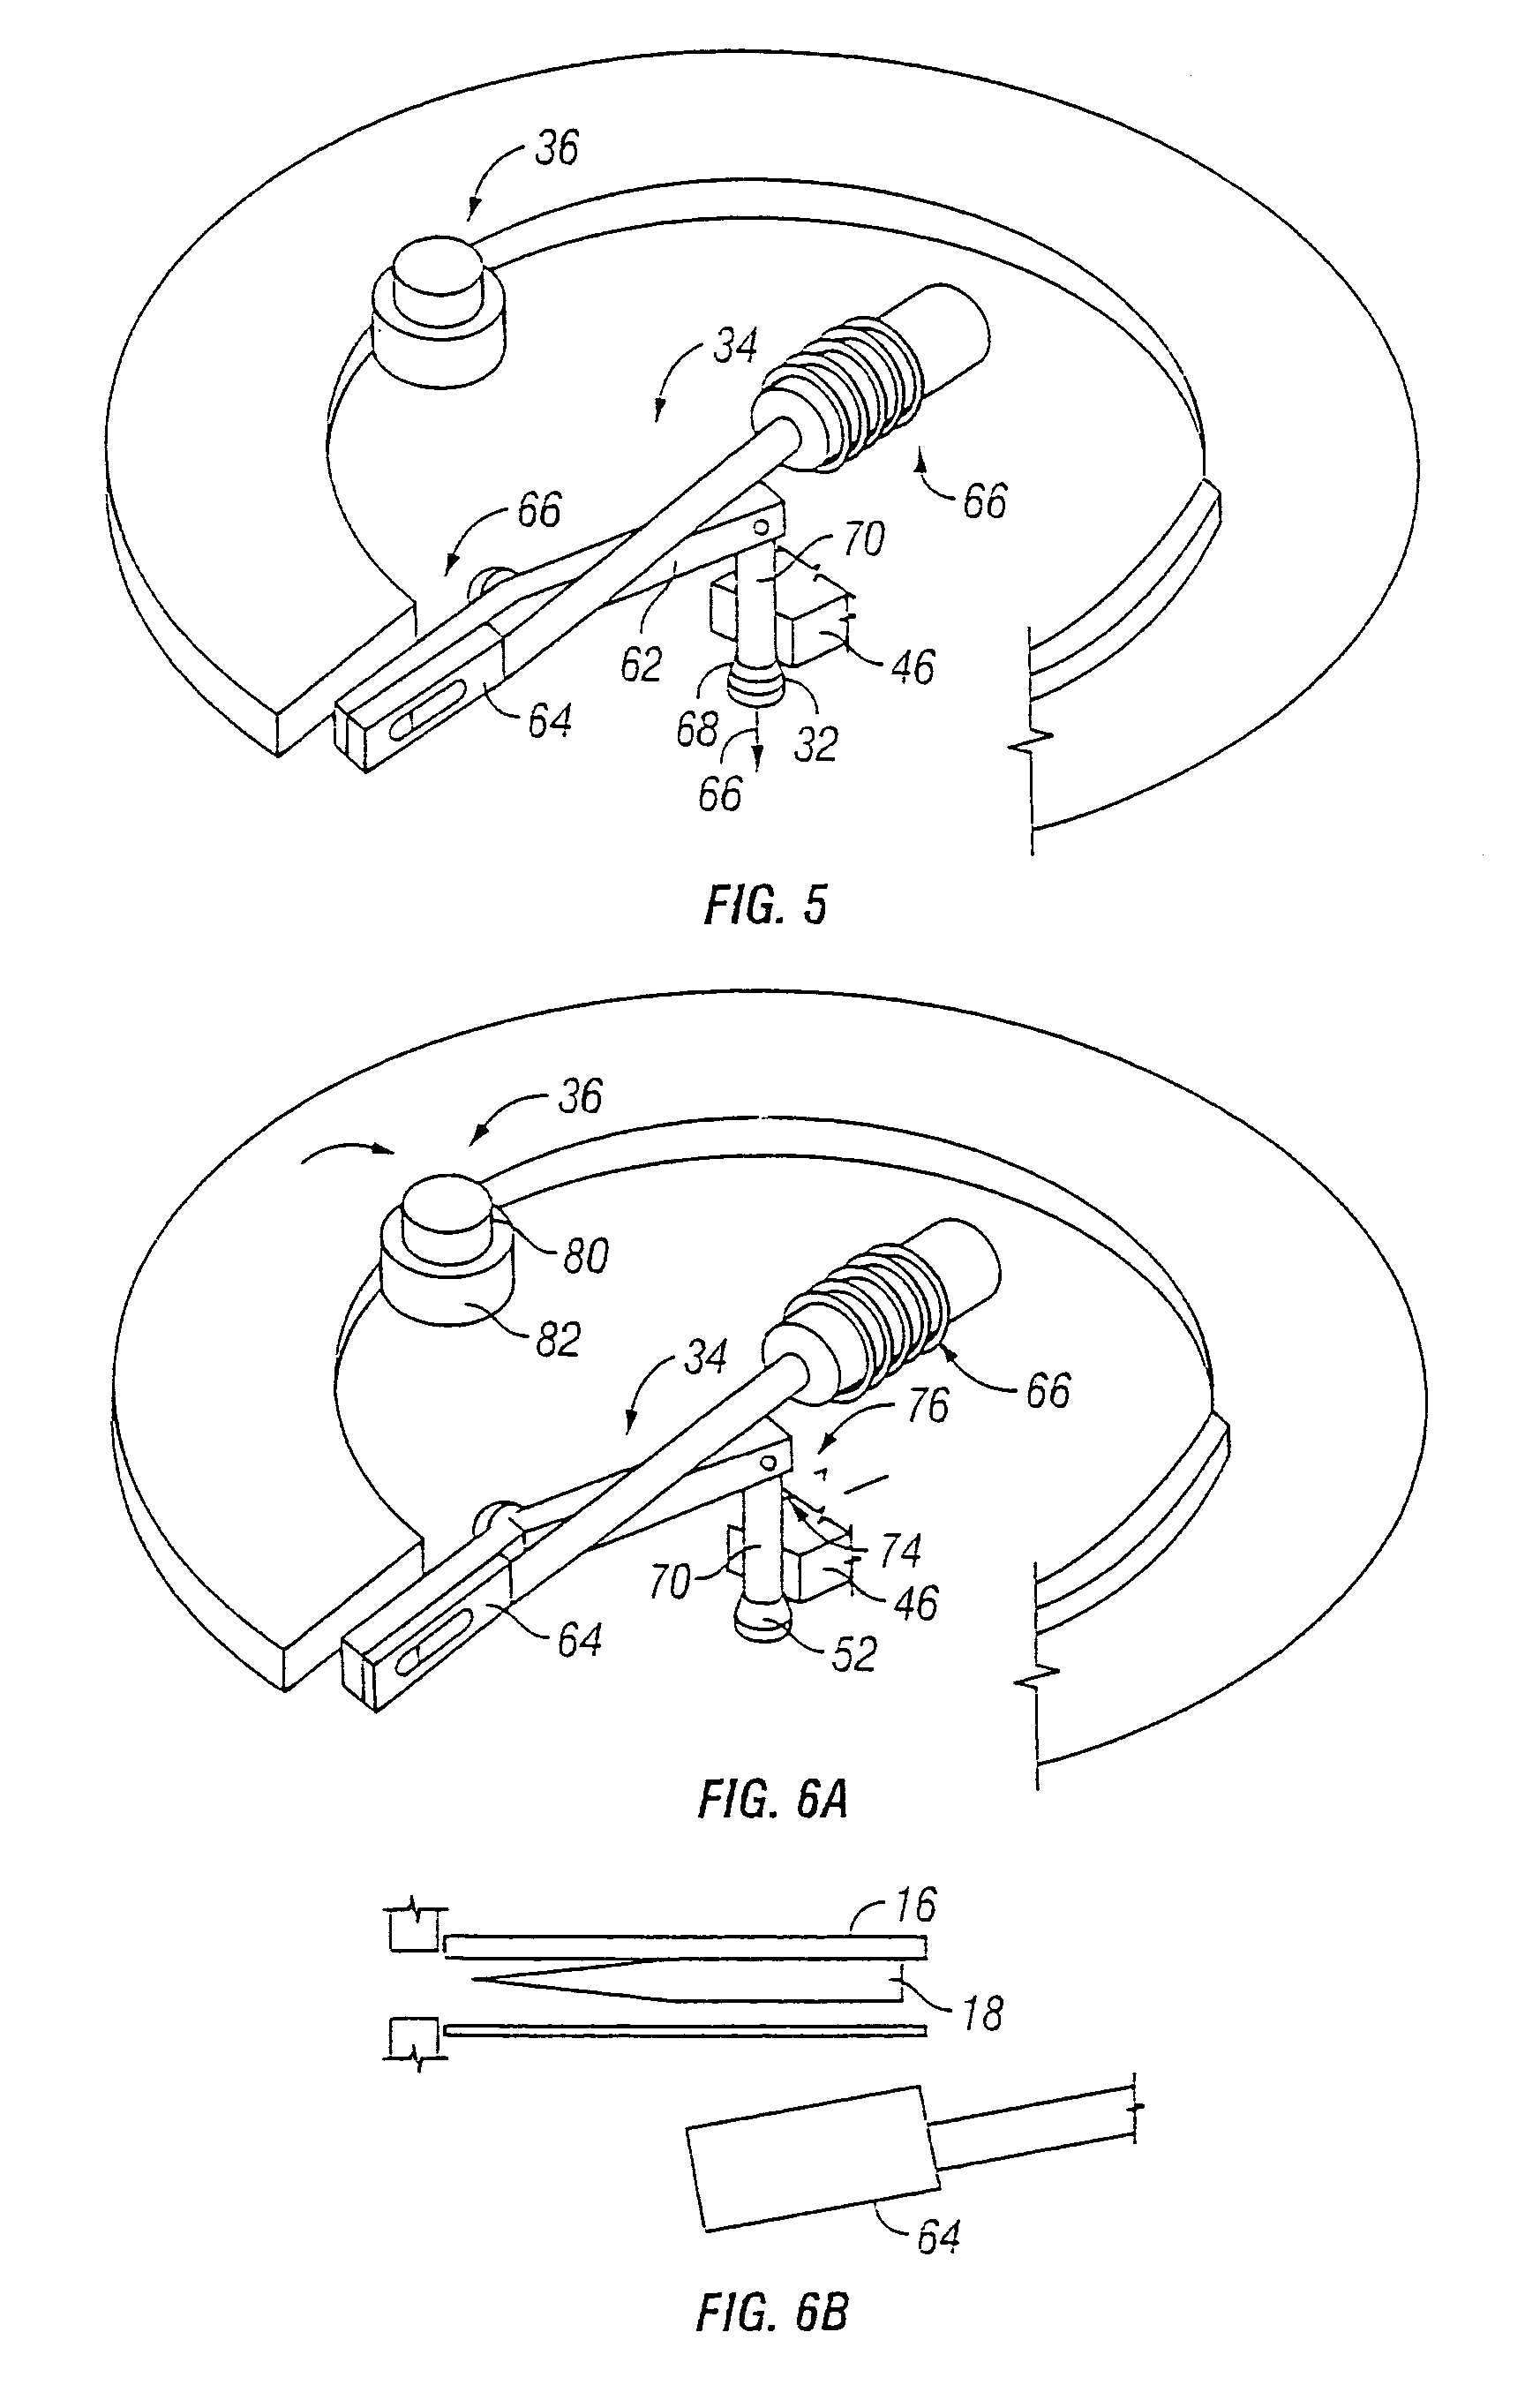 Method and apparatus for a body fluid sampling device using illumination